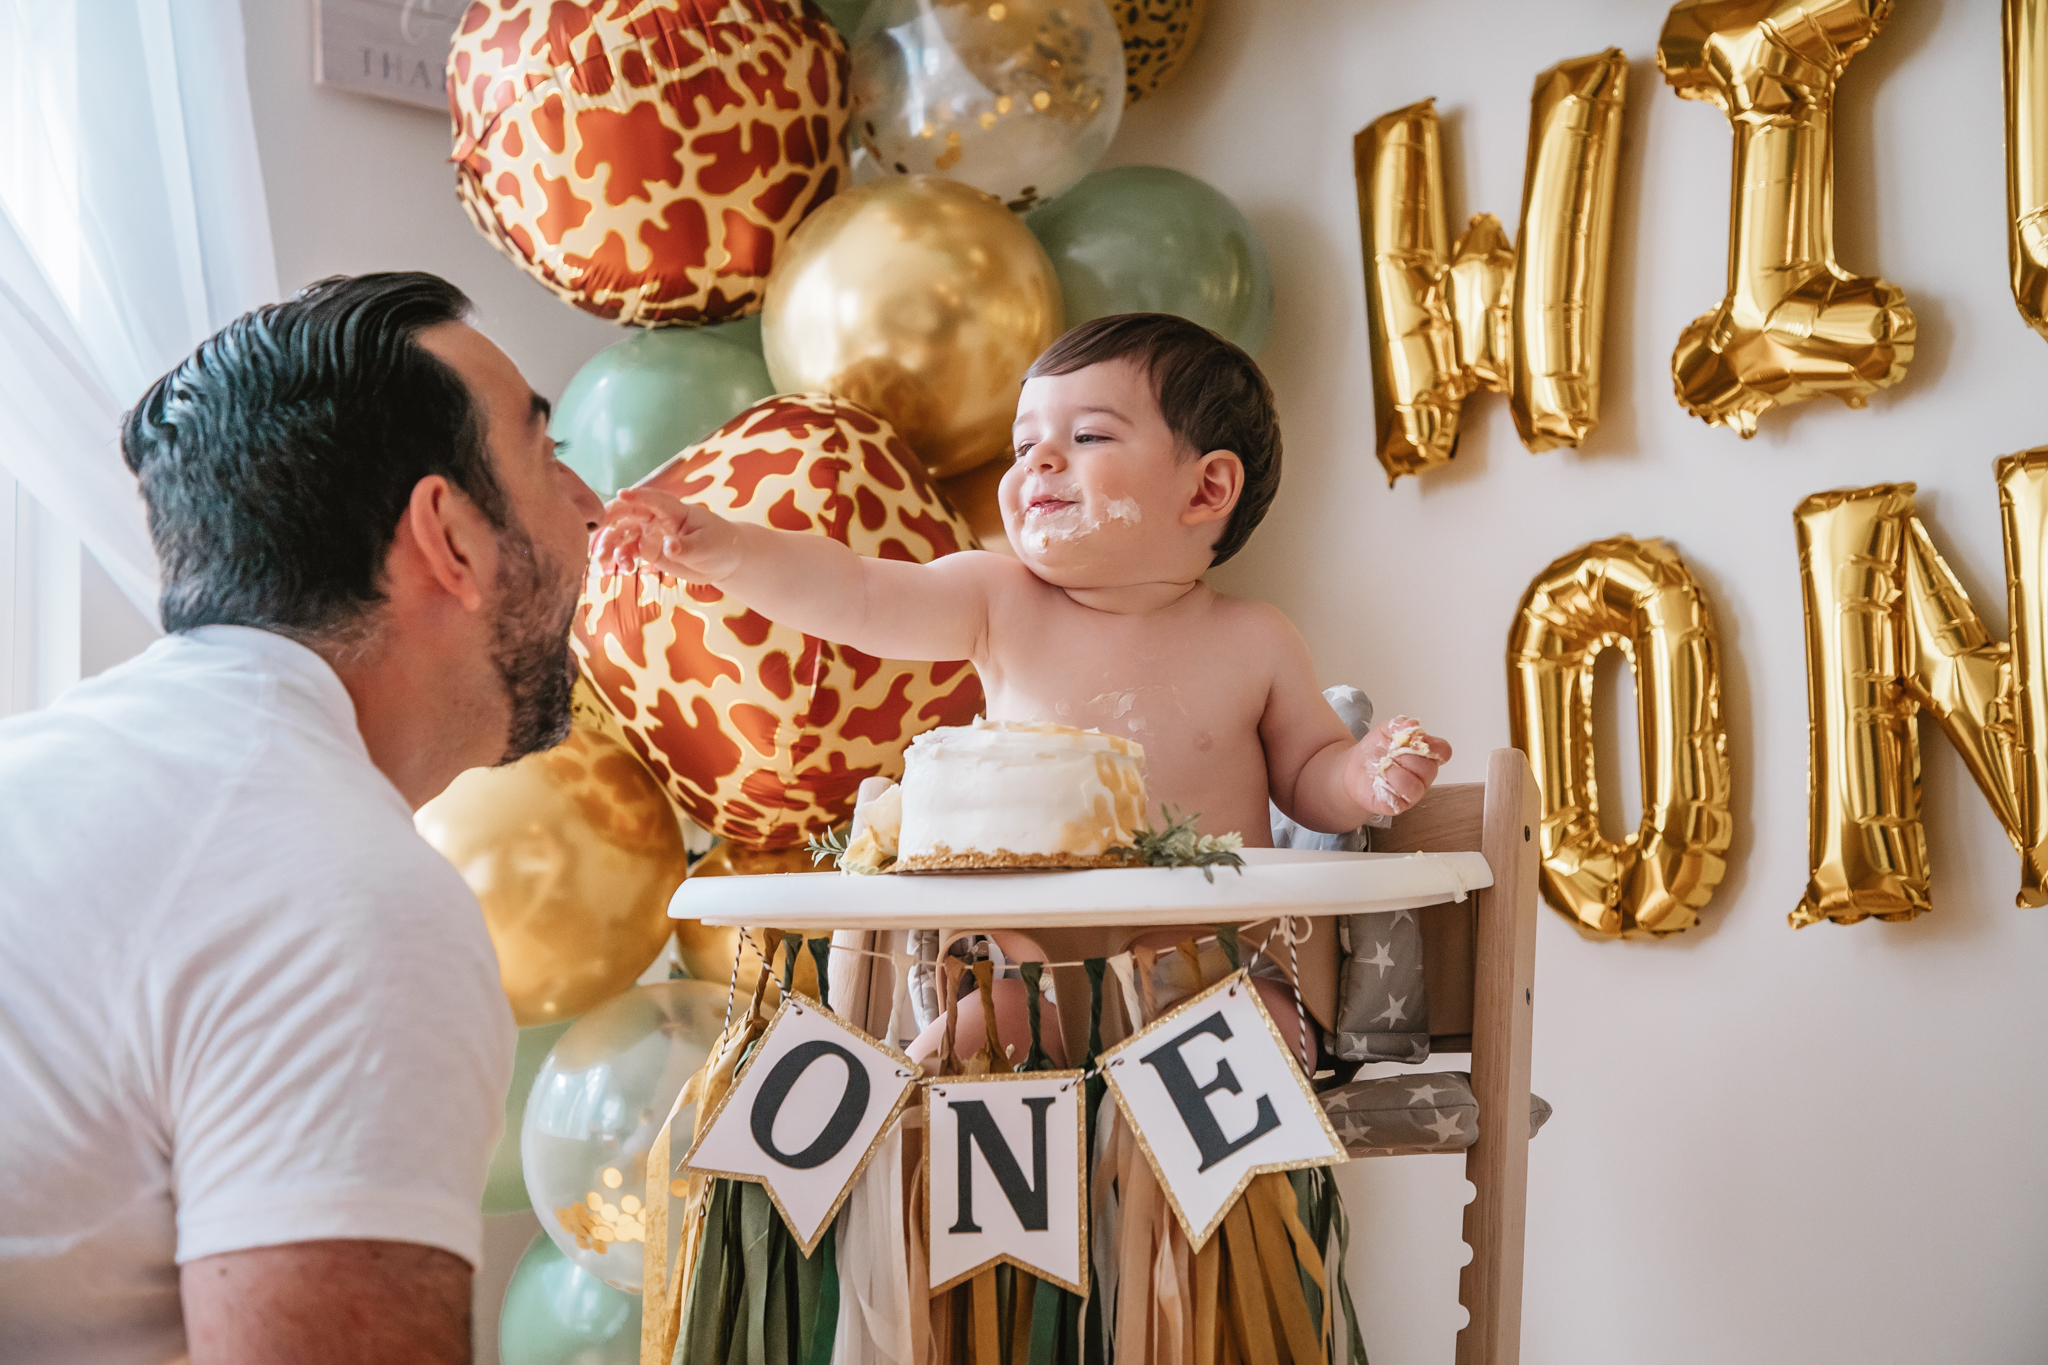 Luca is One! Wild One First Birthday Party – Sunseeking in Style